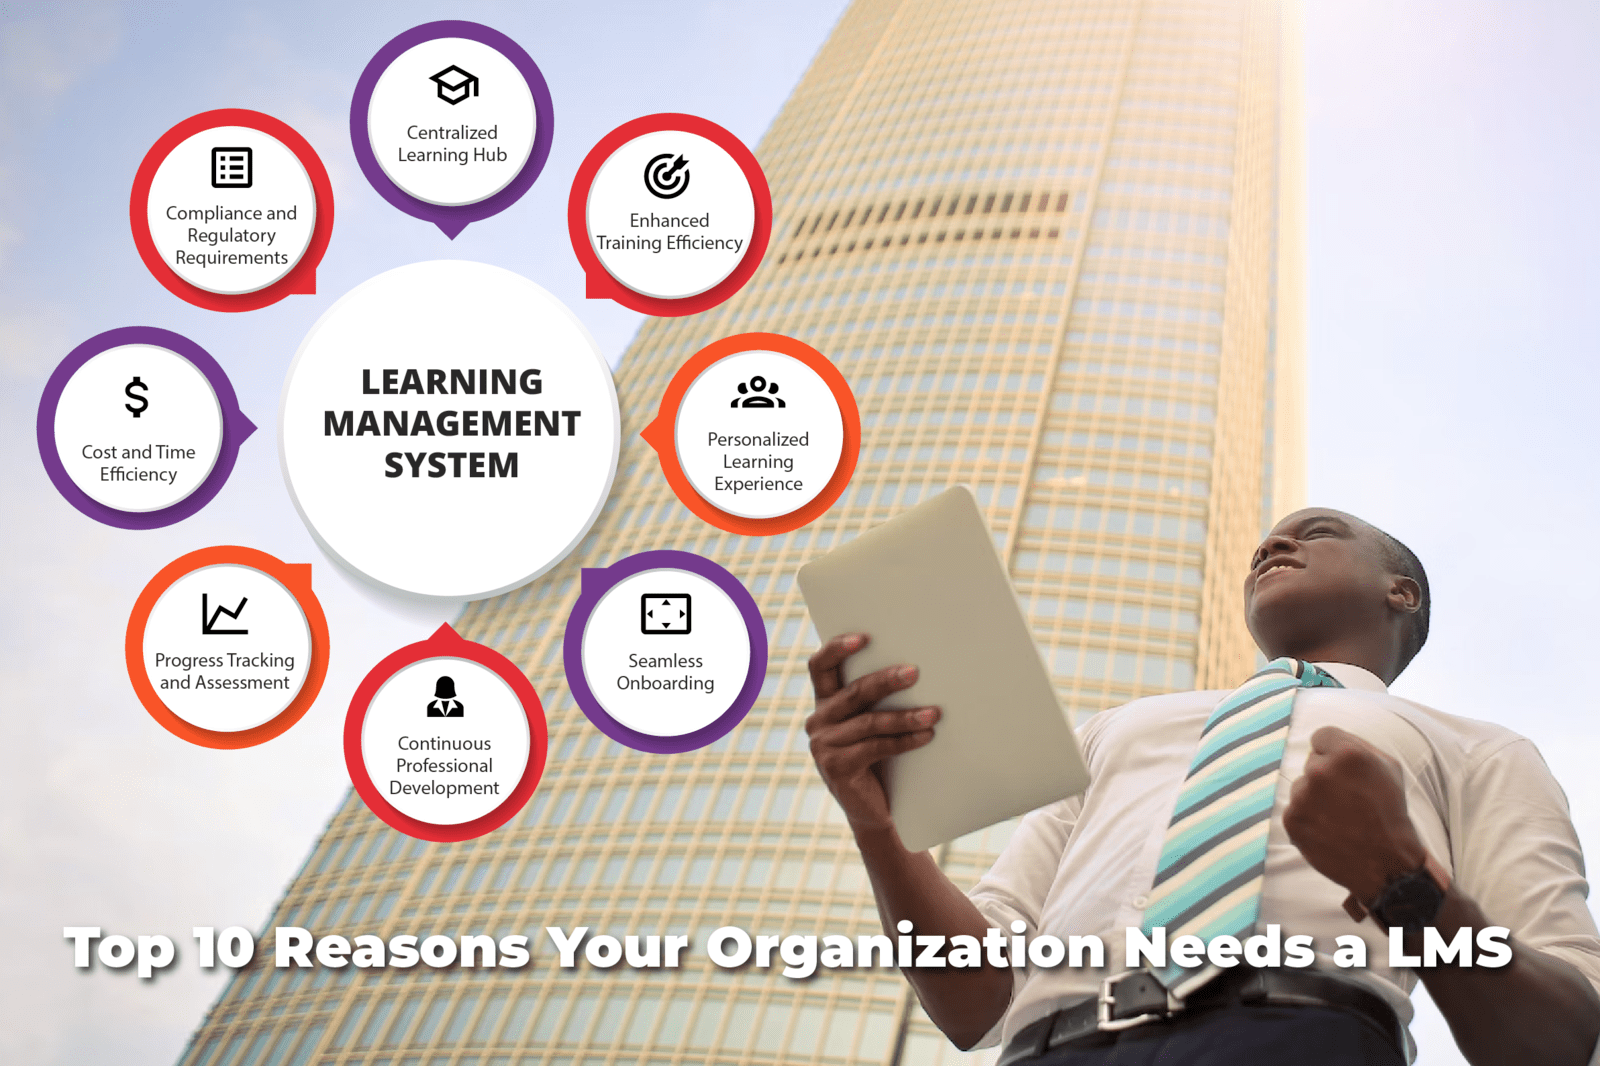 Top Ten Reasons Your Organization Needs a Learning Management System (LMS)